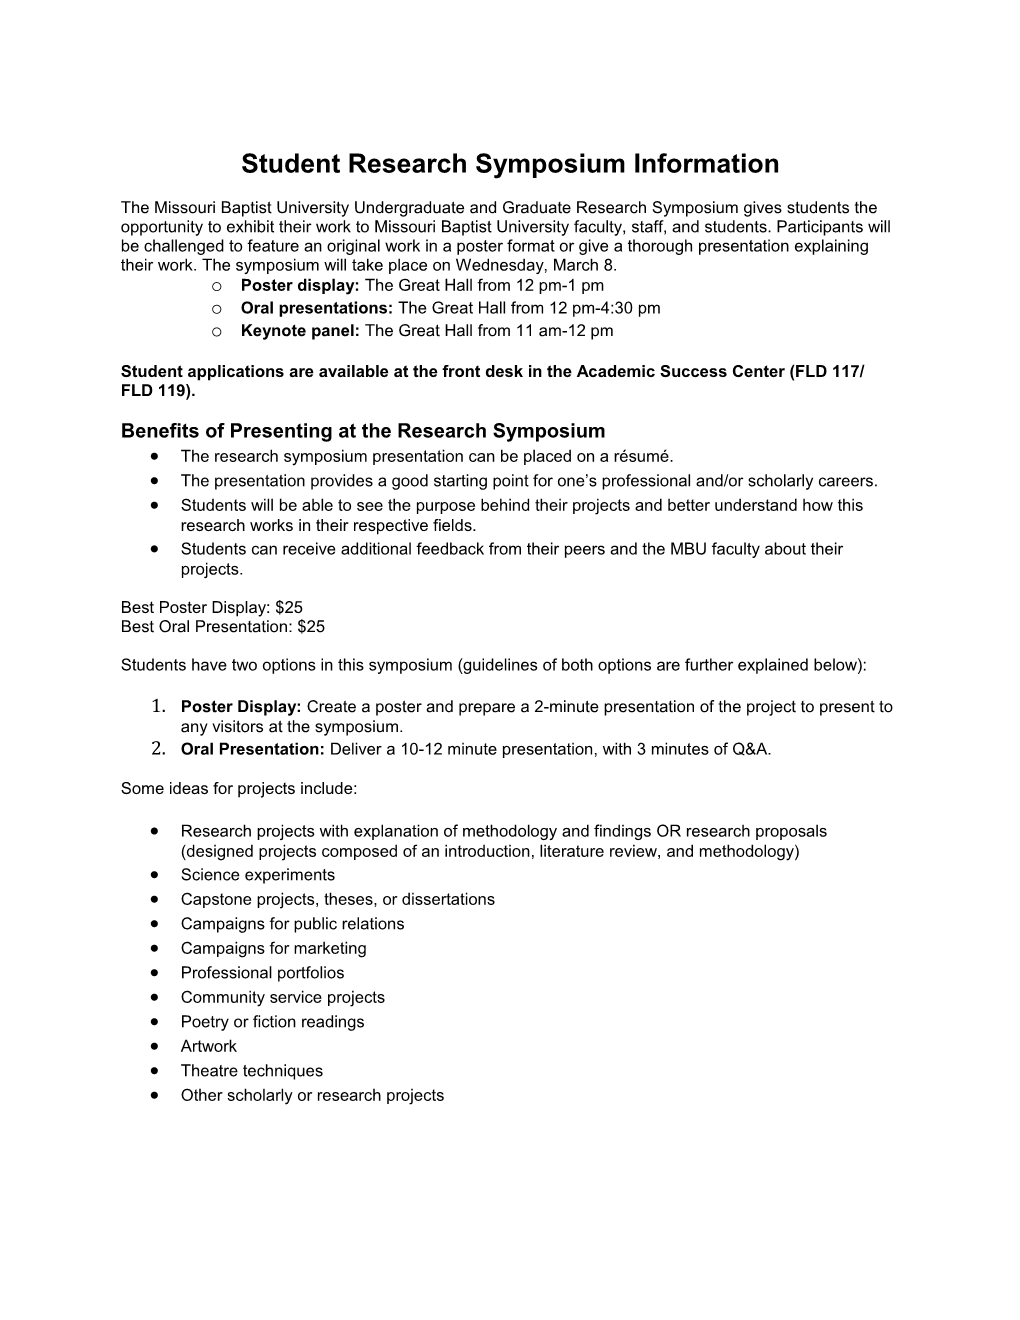 Student Research Symposium Information